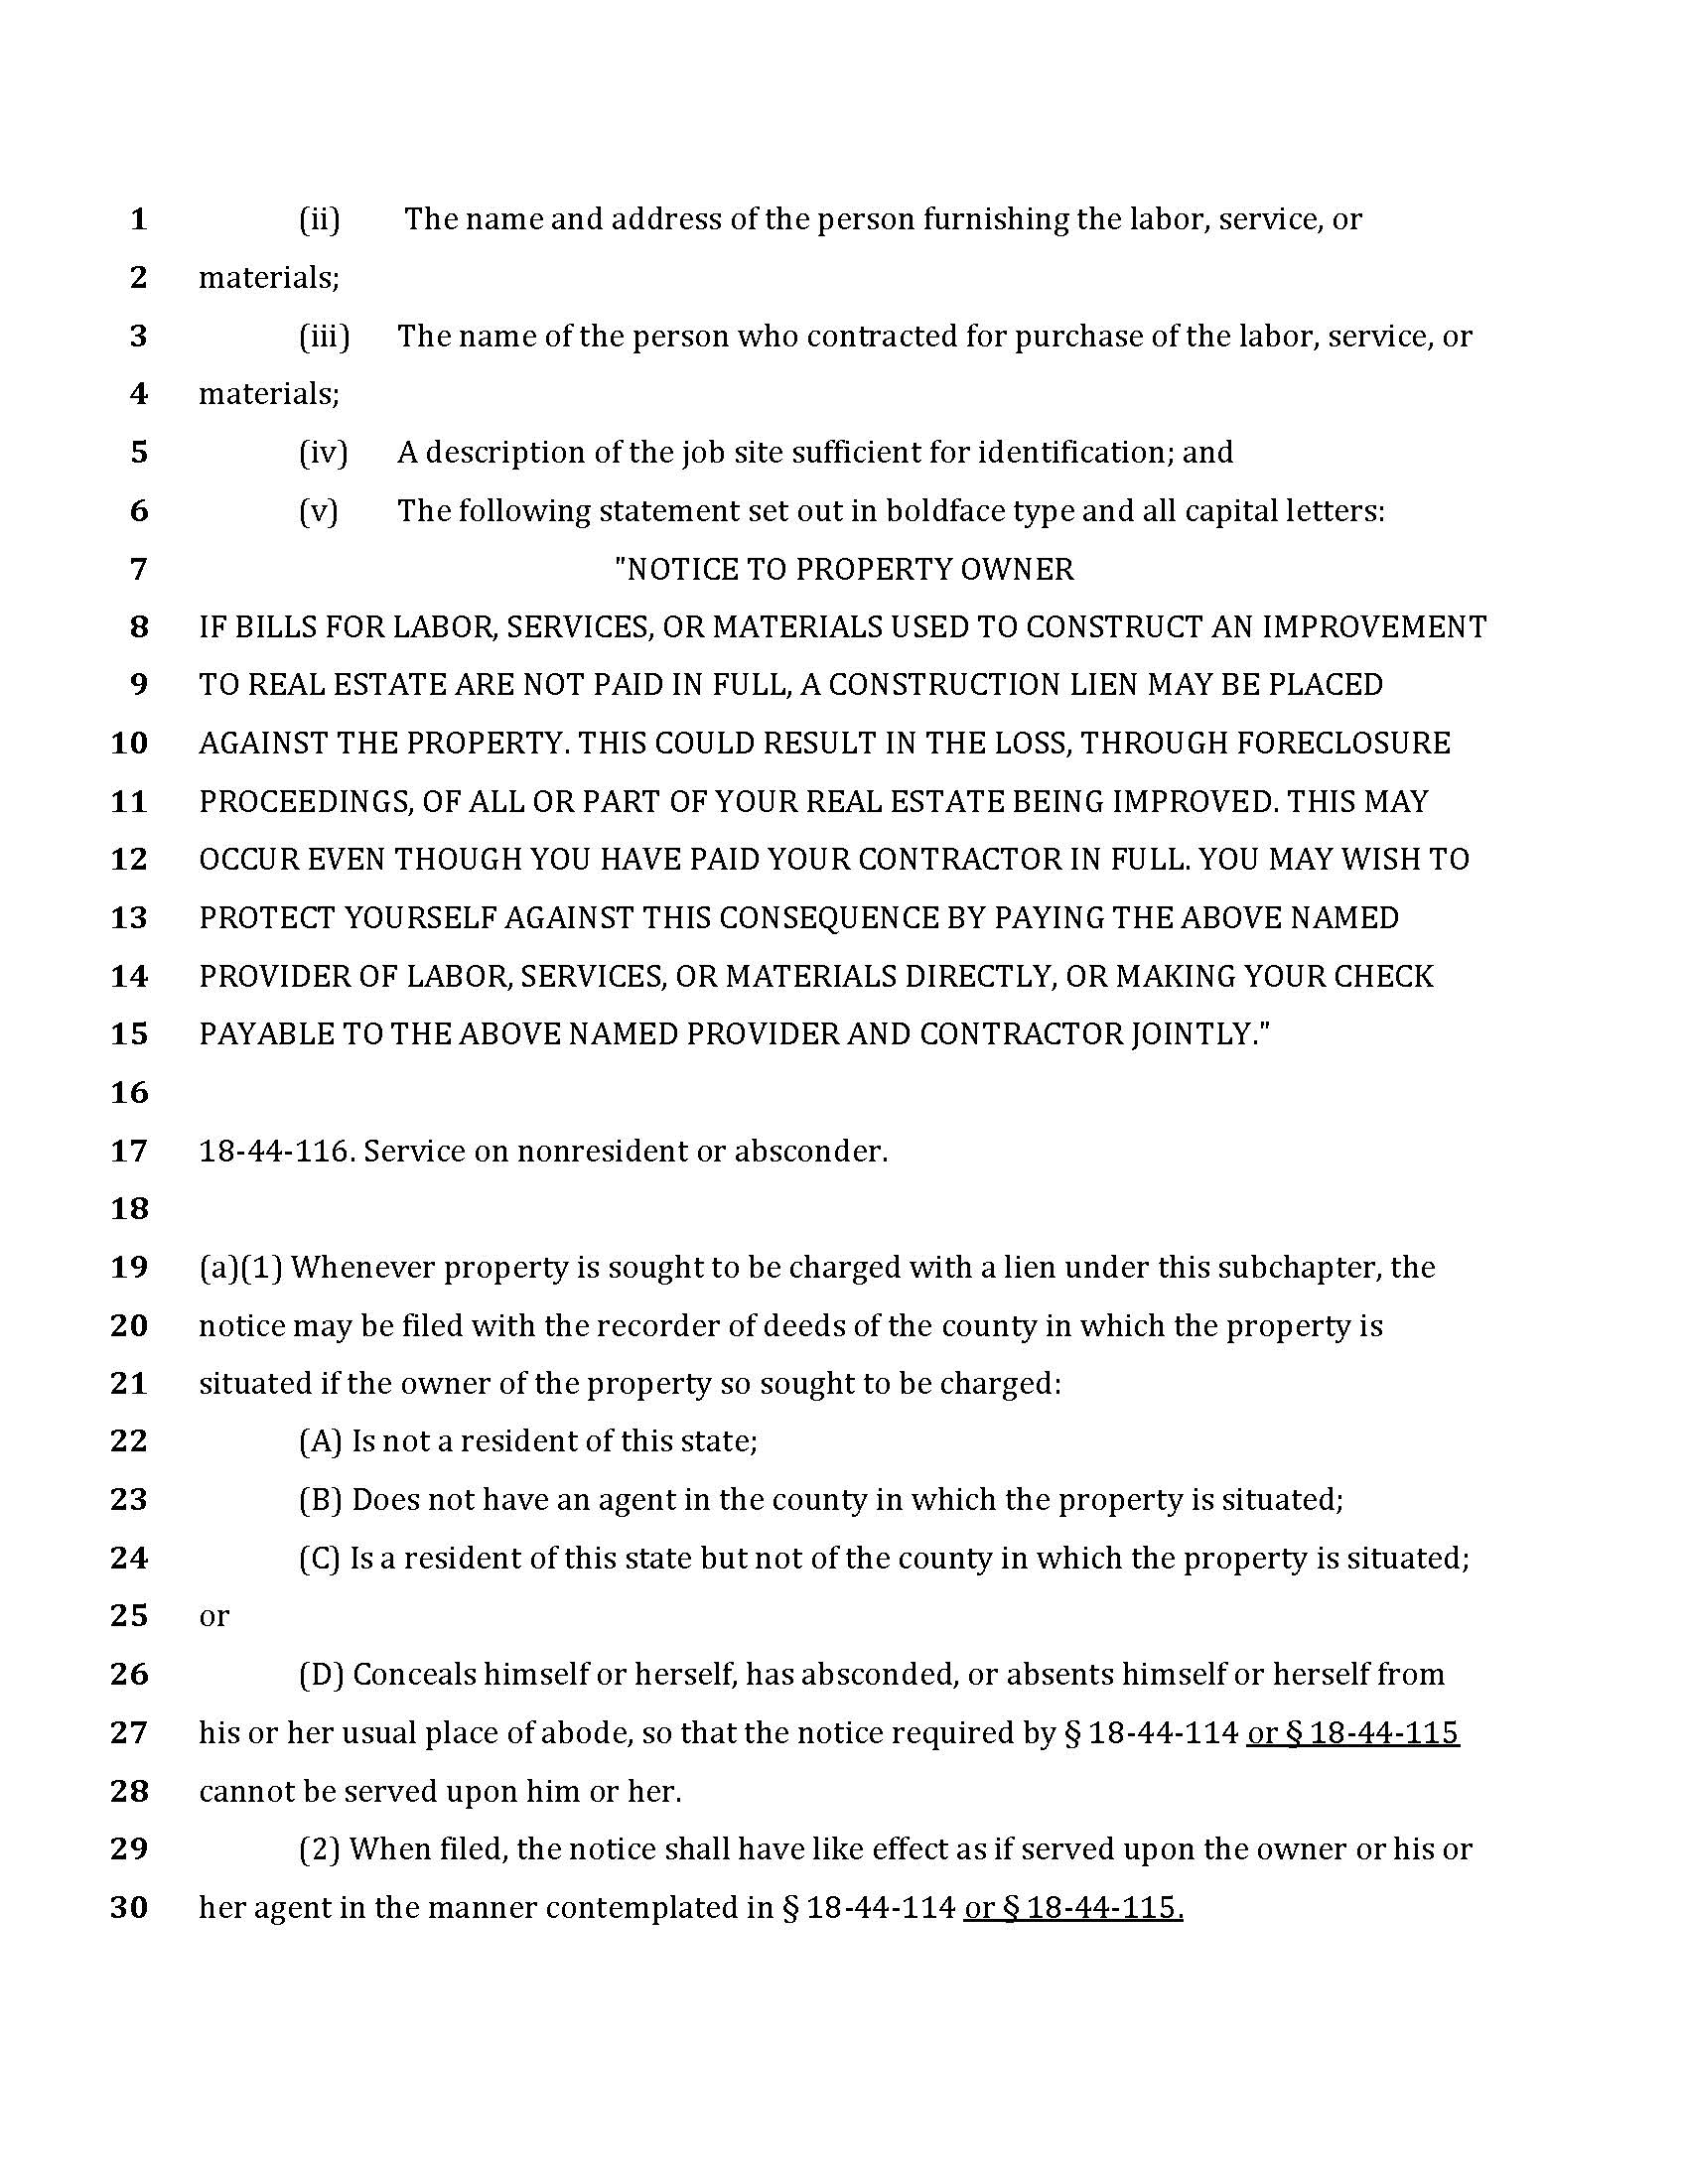 final-bill-lien-law-revisions_Page_09.jpg